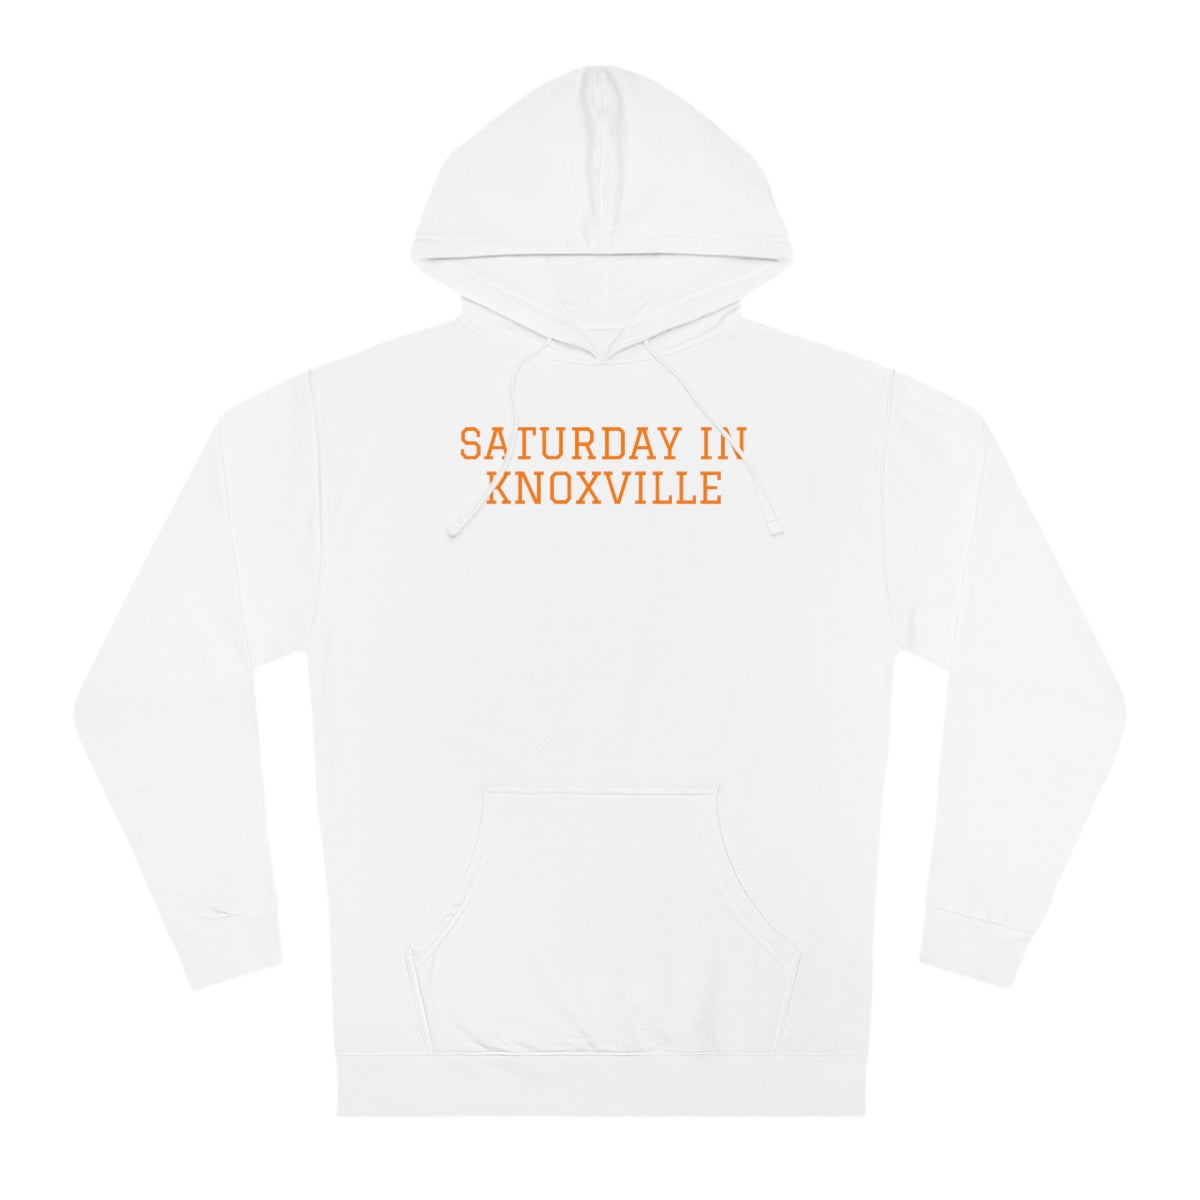 Saturday in Knoxville - Hoodie - White - XL